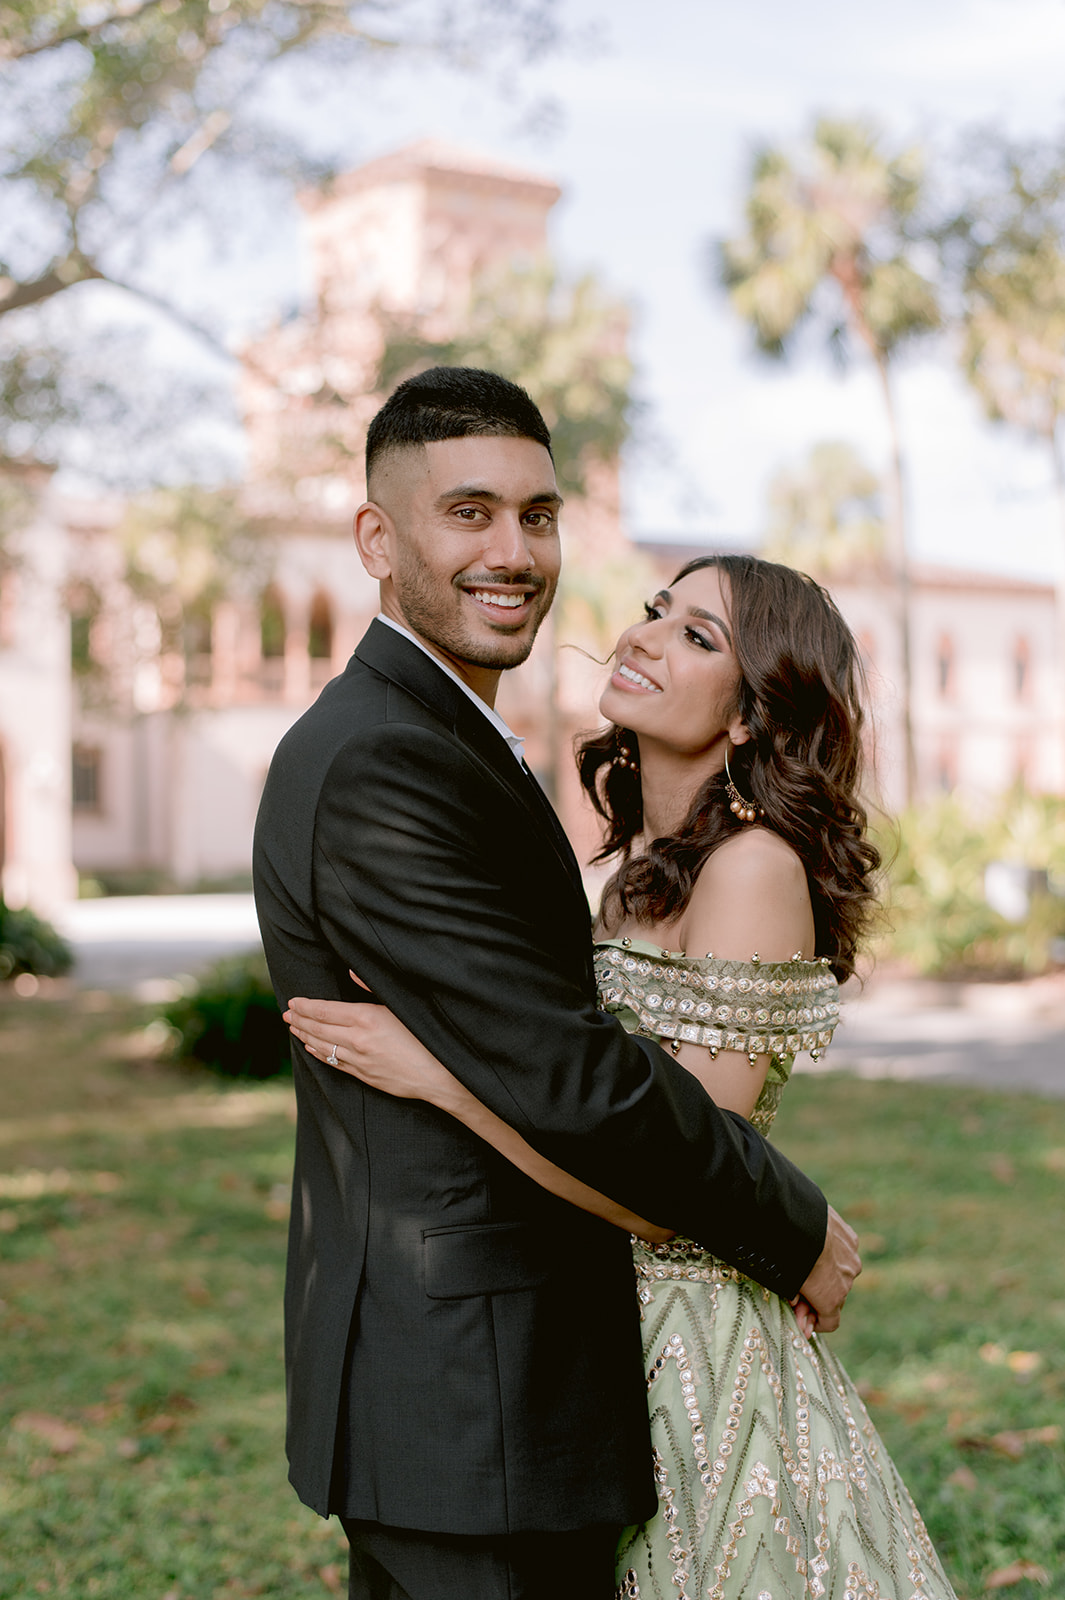 "Indian bride and groom in traditional attire showcase their love during their engagement session at the Ringling Museum